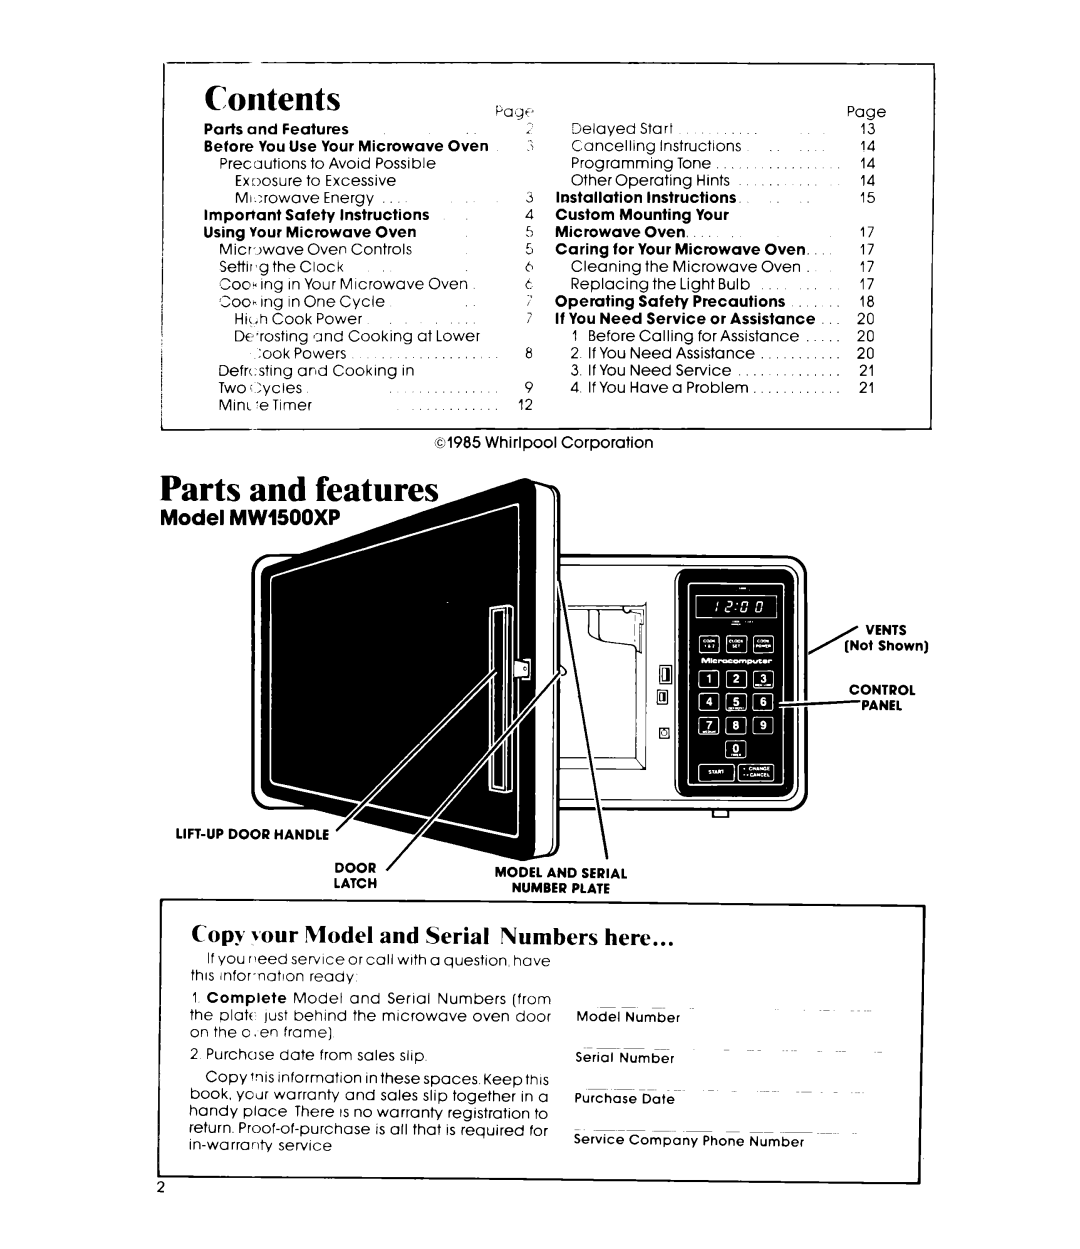 Whirlpool MW1500XP manual Part S, Contents, Copy b’our Model and Serial Numbers here, Model IM 